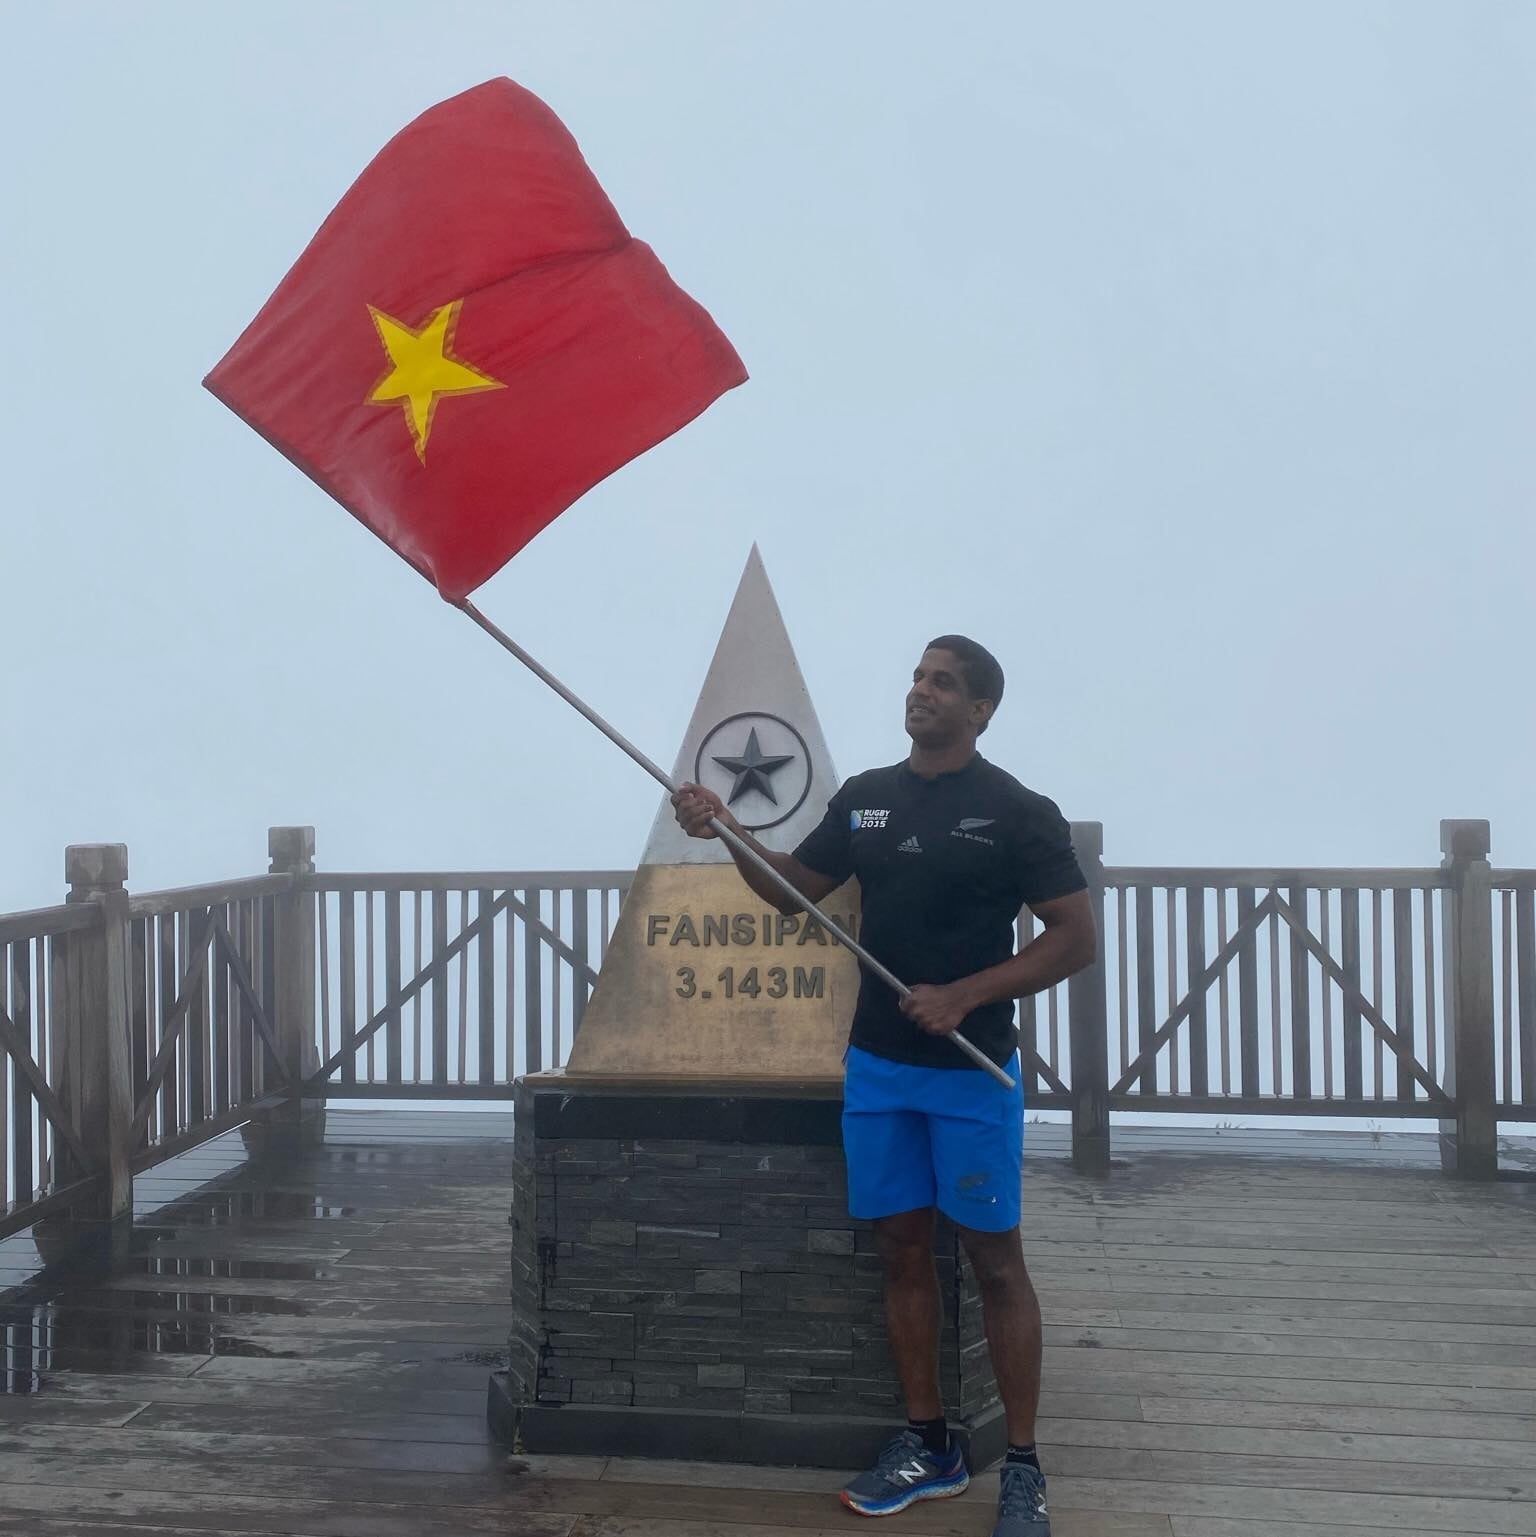 Robin of Baba’s Kitchen holding up the flag in Vietnam